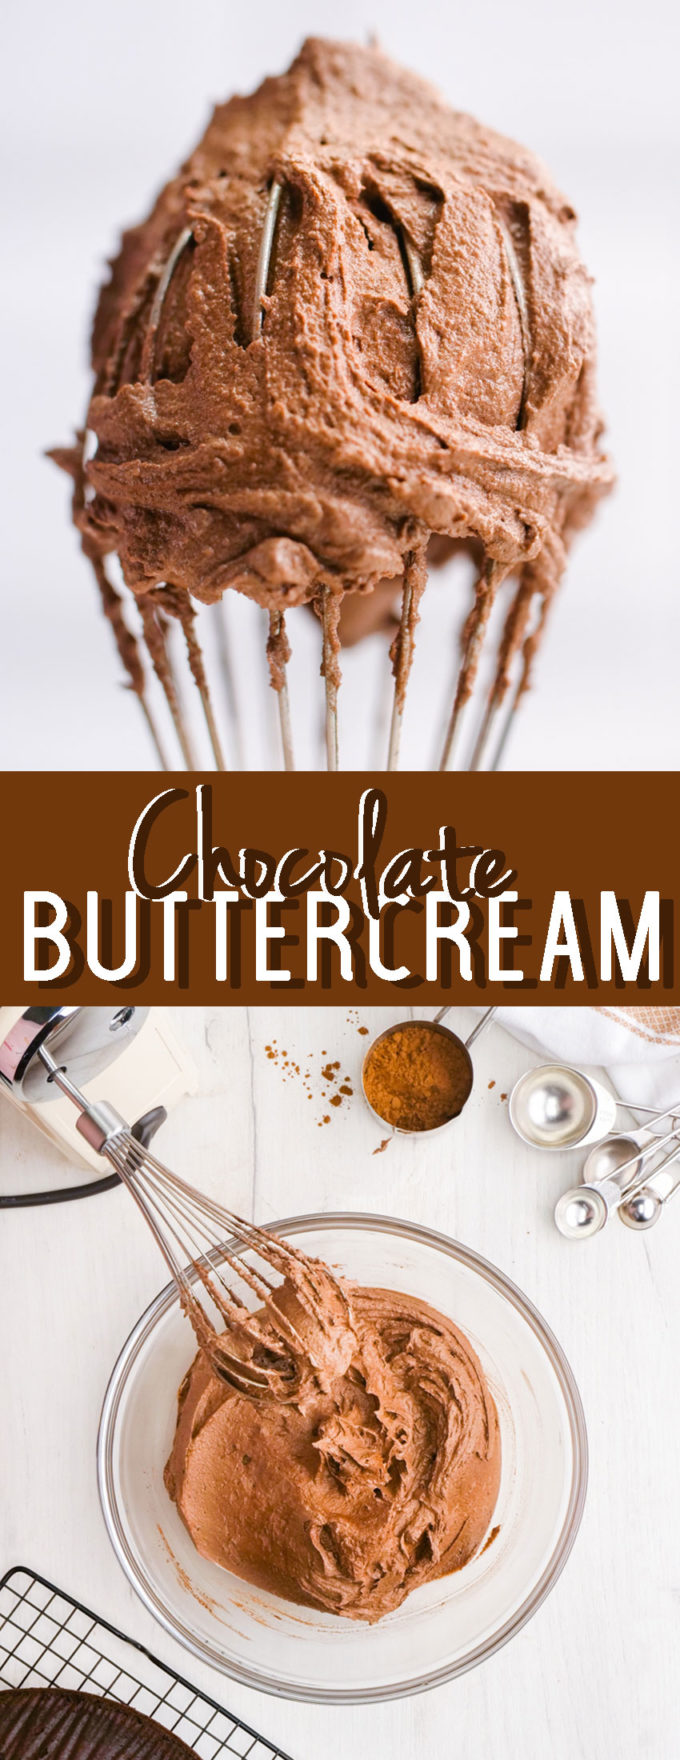 A simple chocolate buttercream frosting that is light, airy and oh so delicious